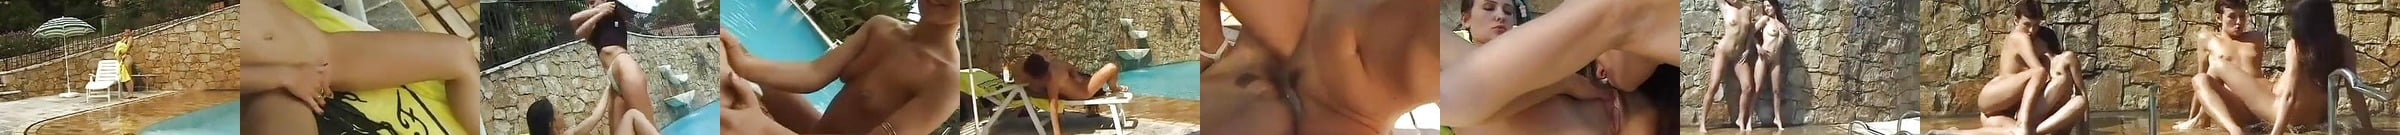 Featured French Porn Videos 44 Xhamster